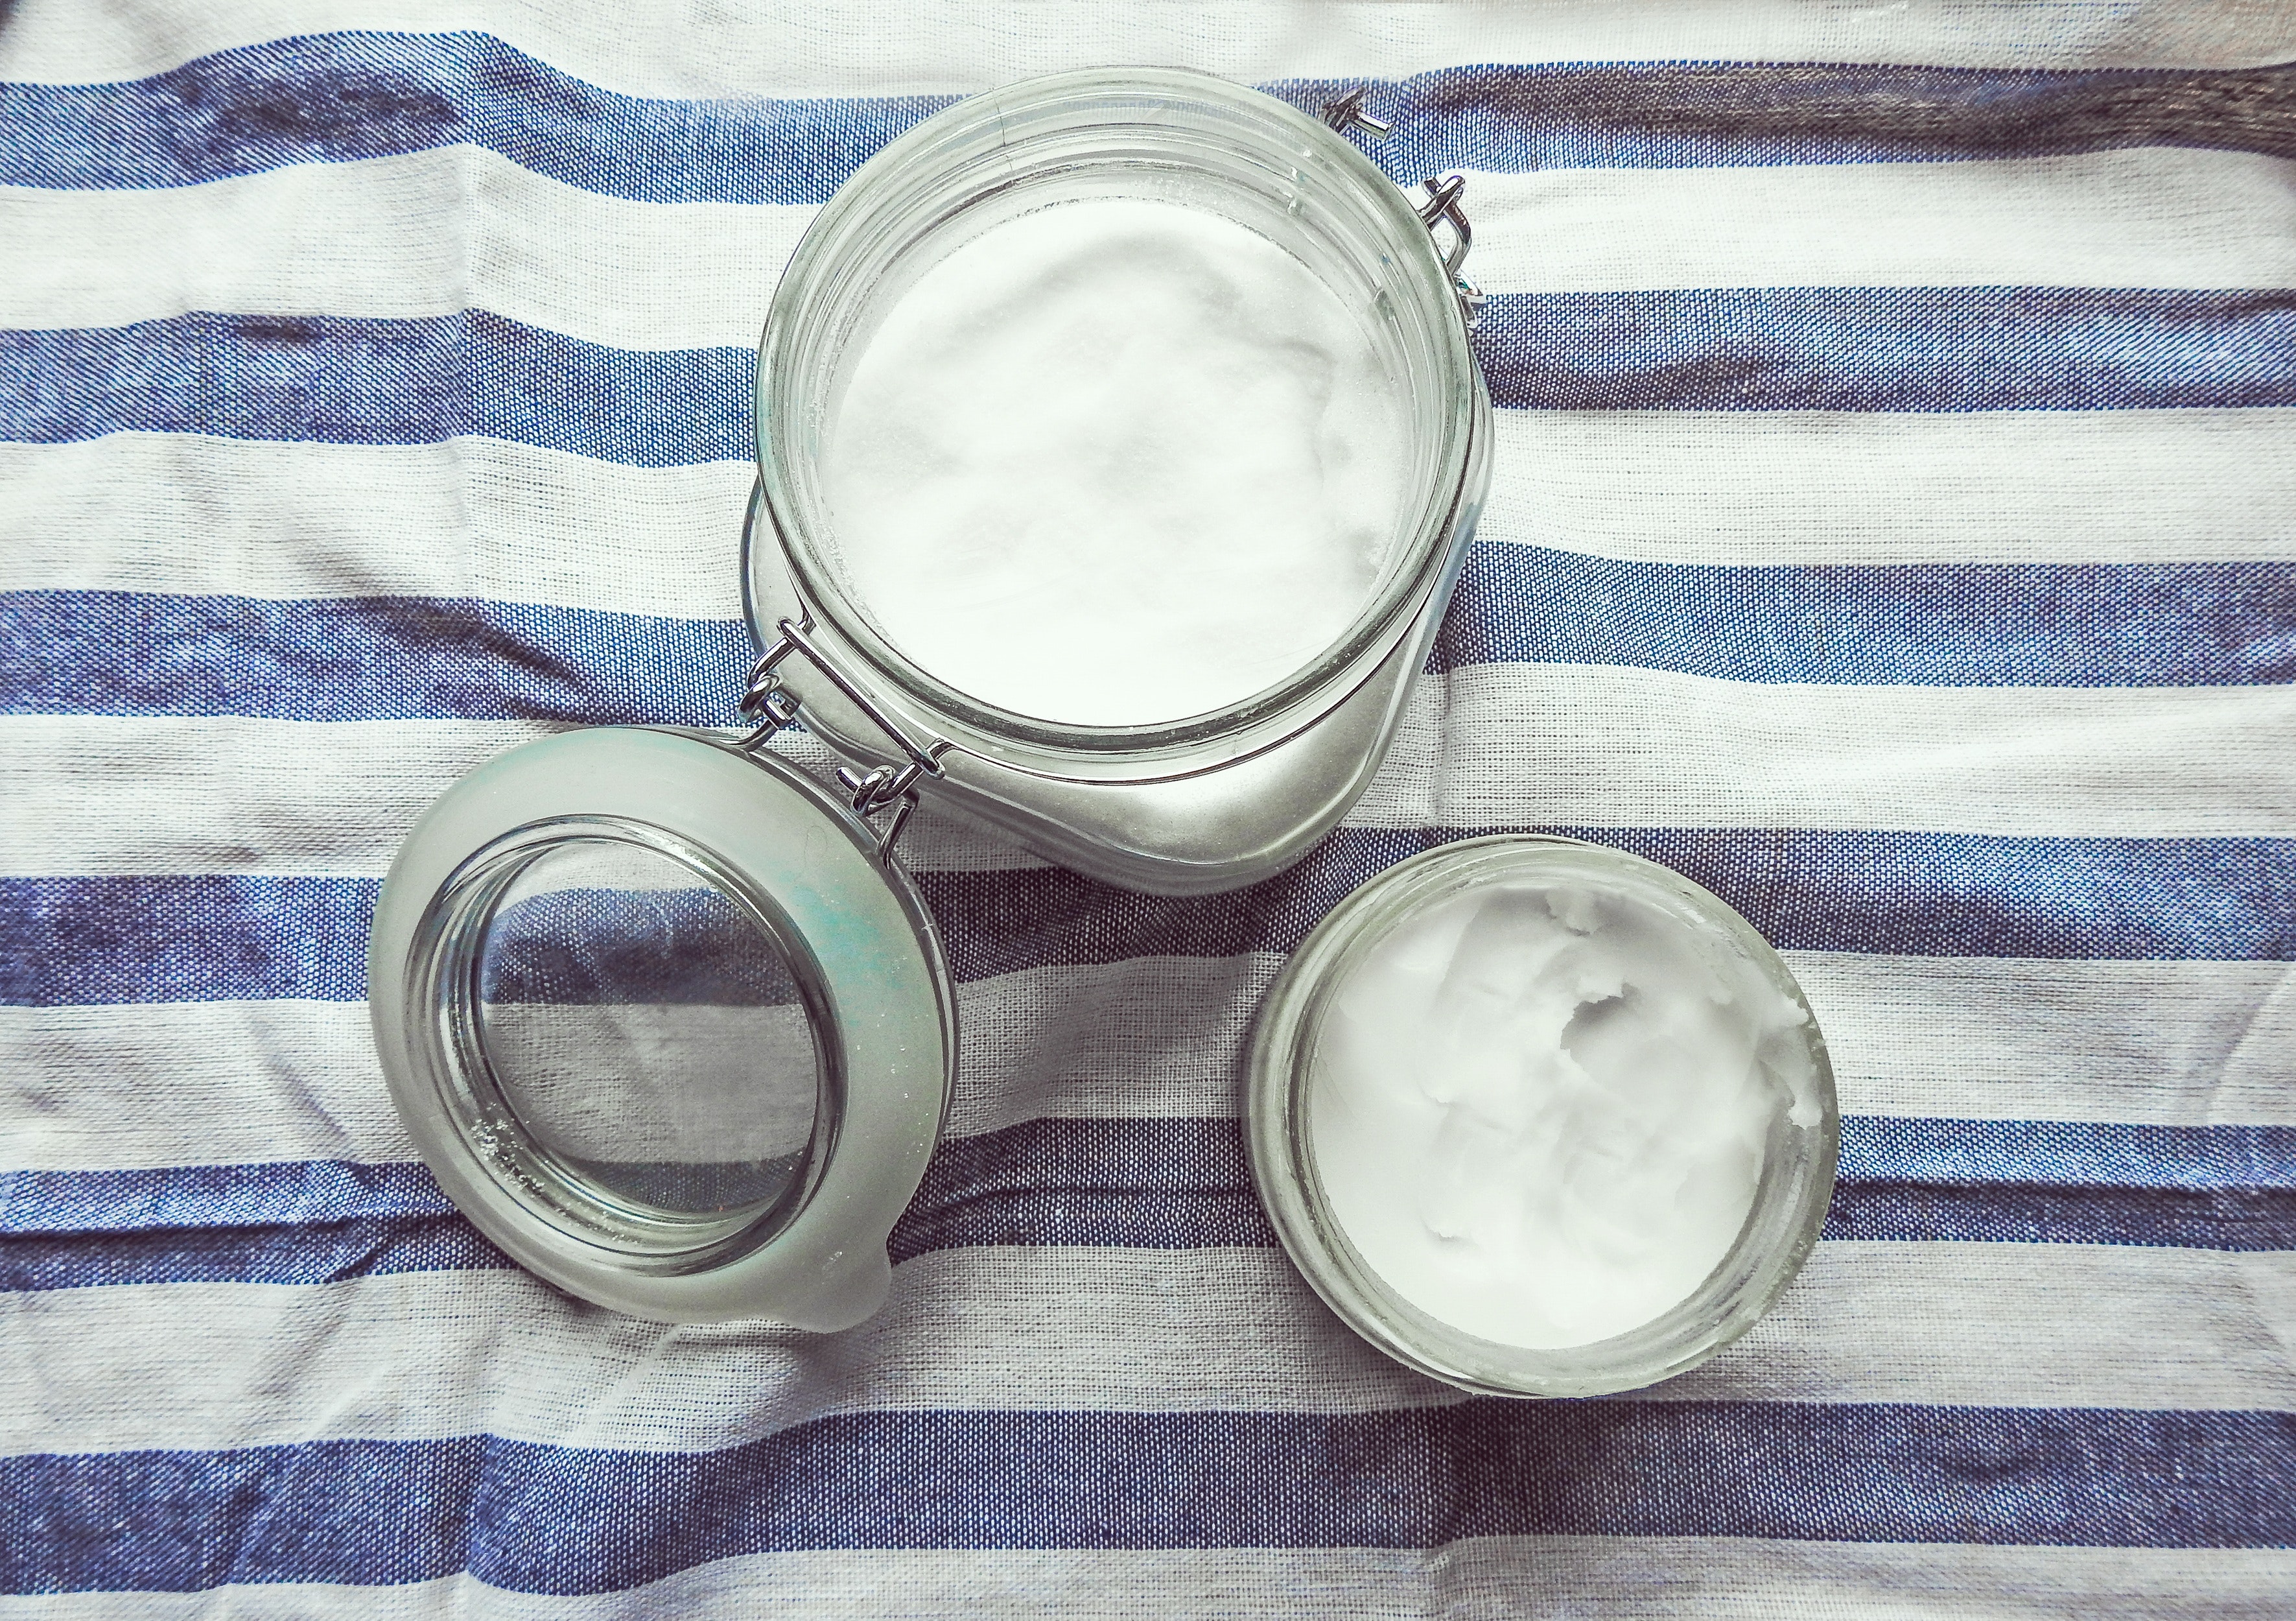 coconut oil for weight loss in jars